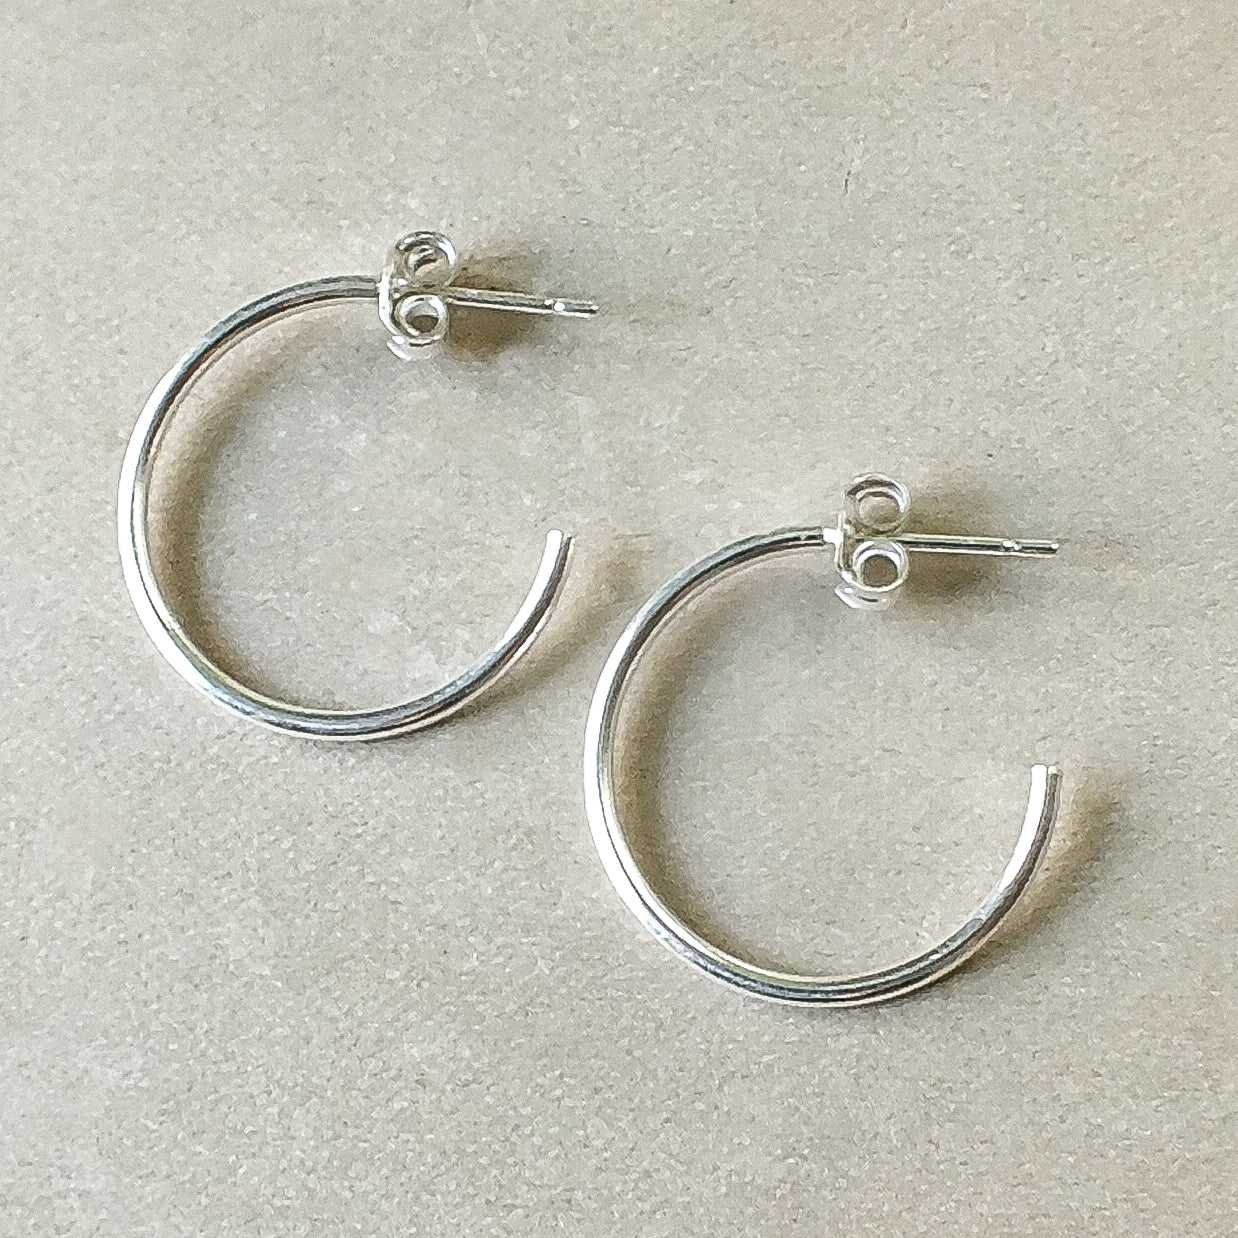 A pair of dainty silver Open Hoop Earrings, large by Becoming Jewelry on a light background.